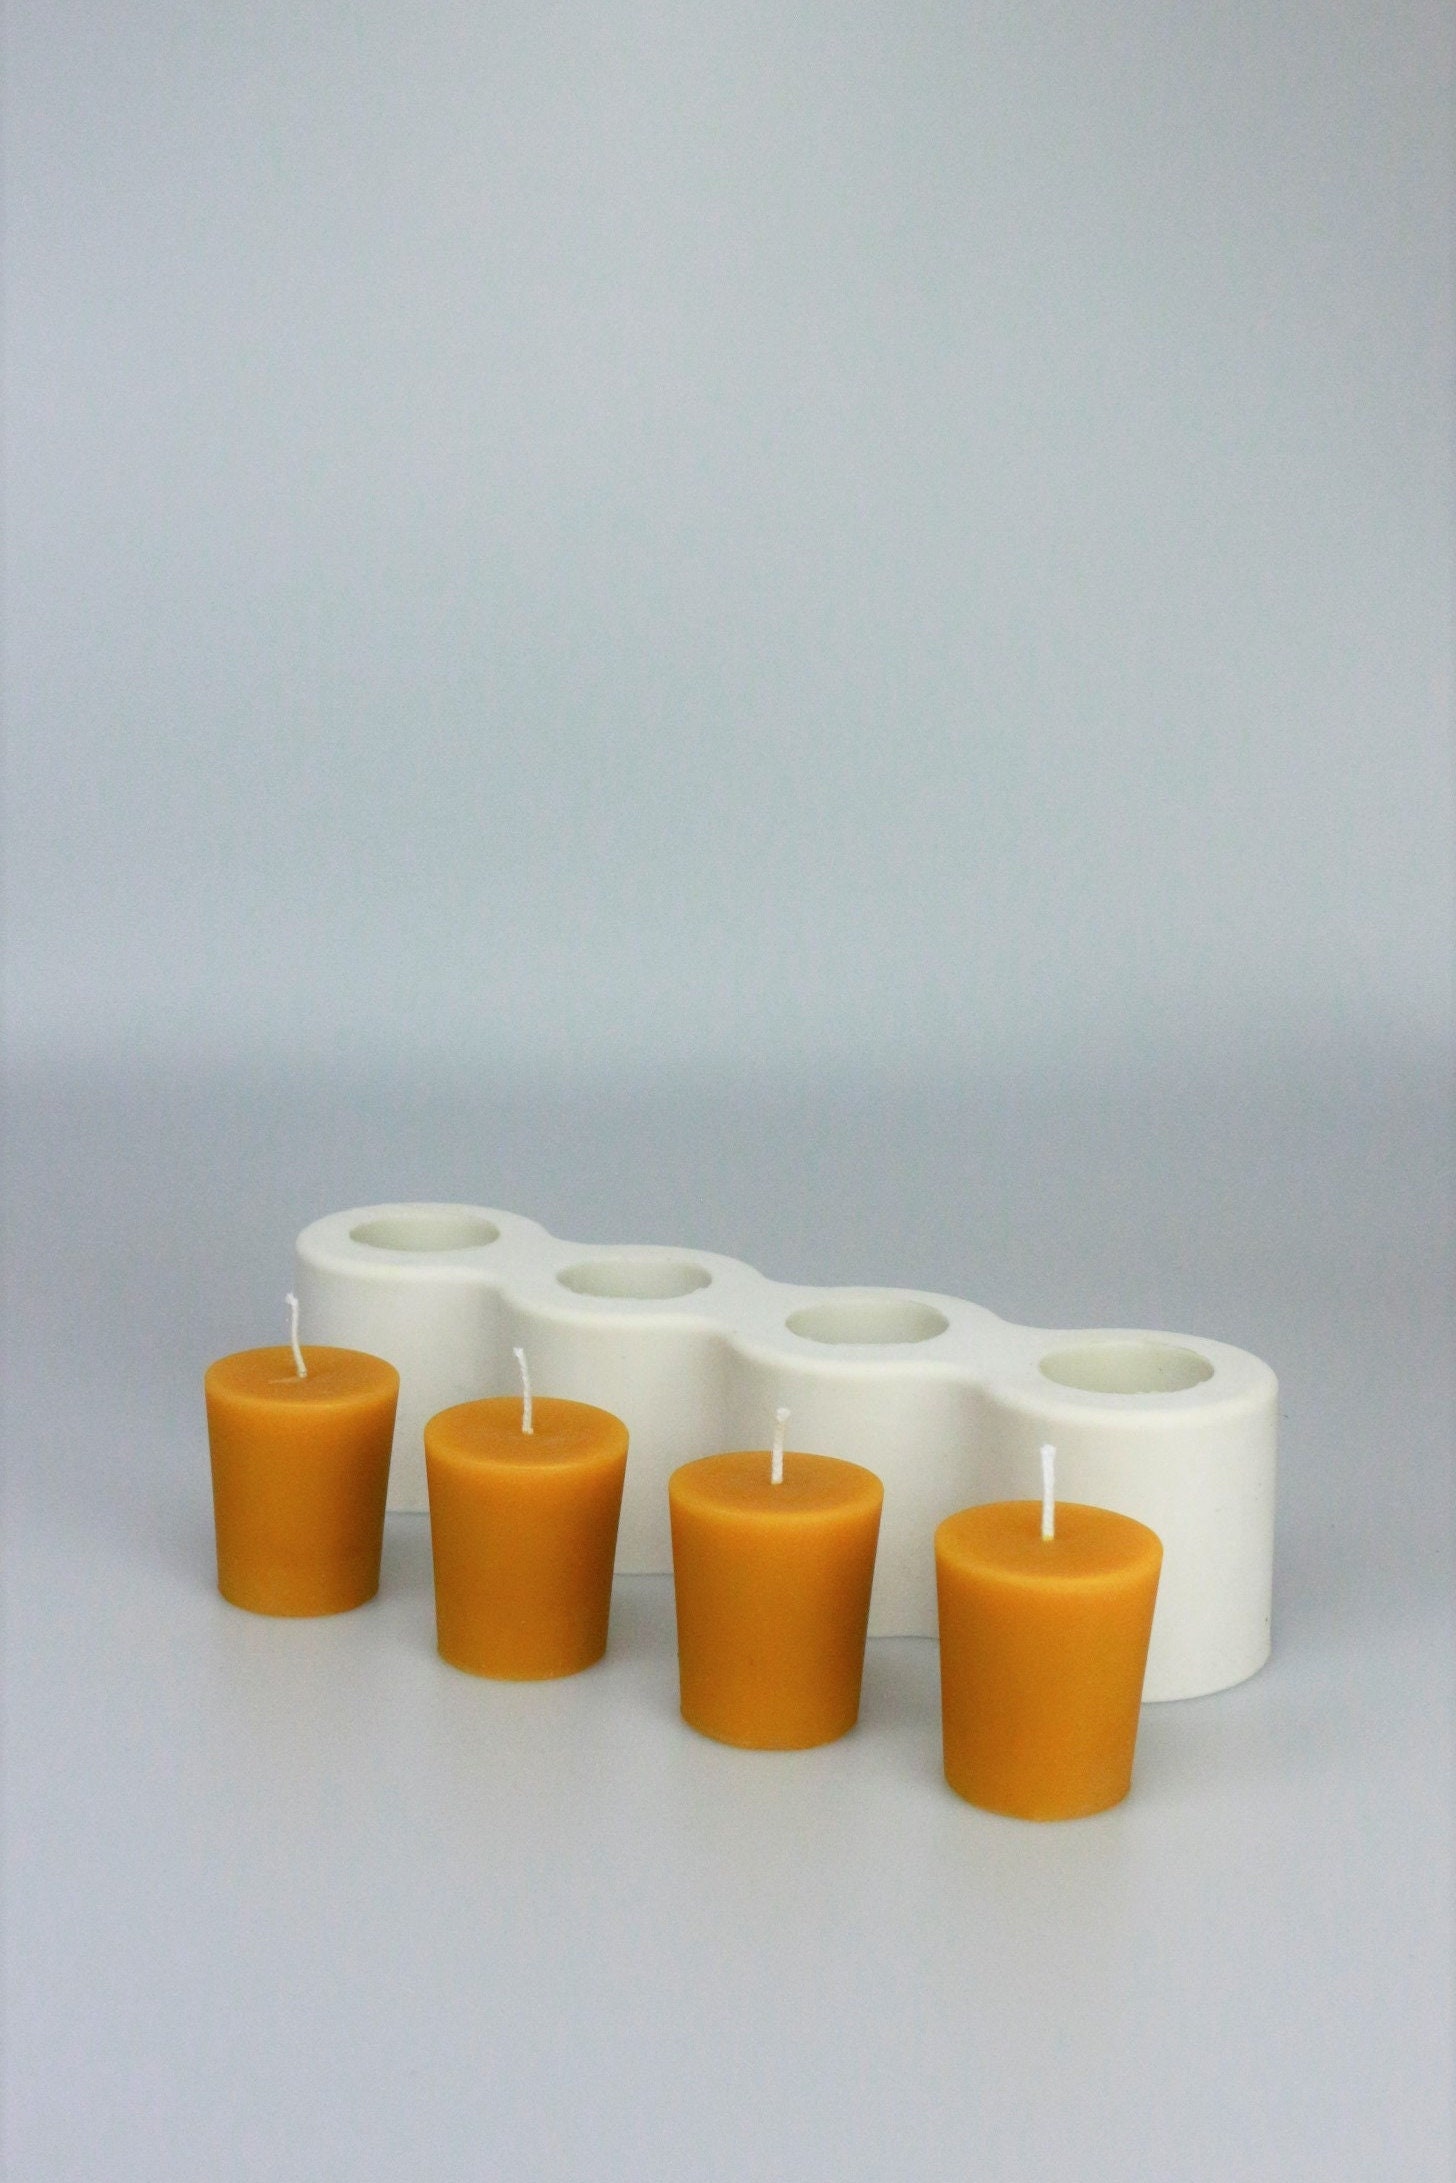 10 x Seamless votive Candle Making moules Craft UK MADE S7619 plastique rigide 